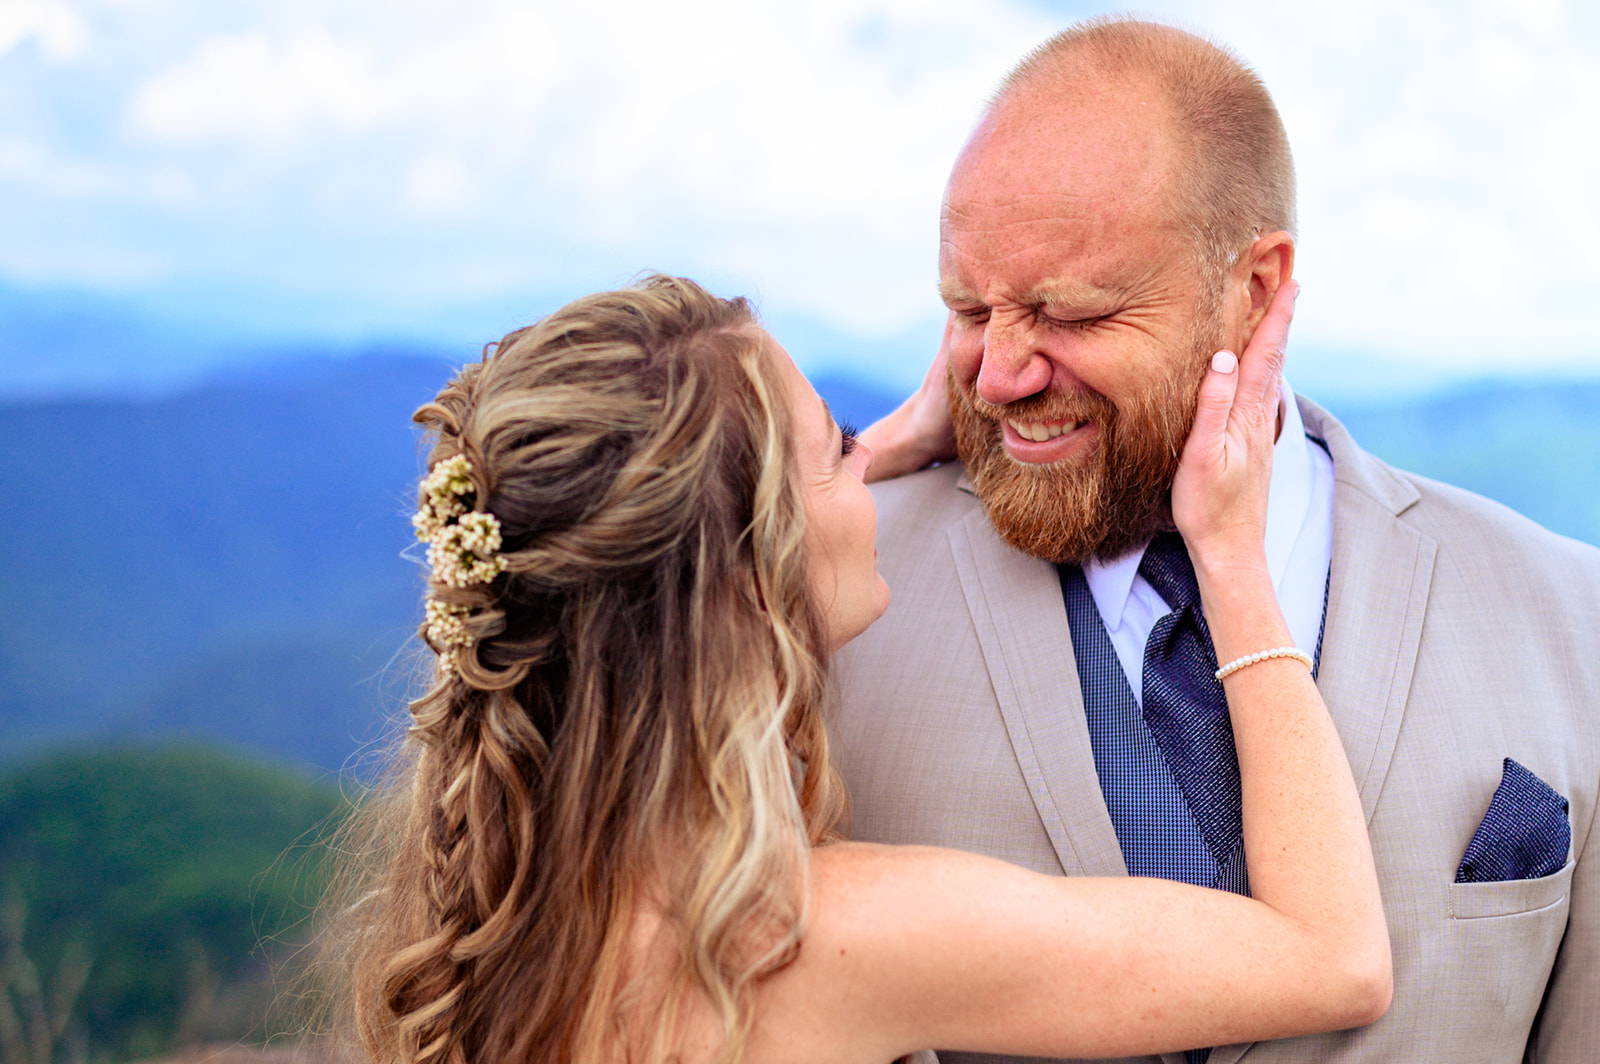 bride and groom share first look at wayah bald fire tower